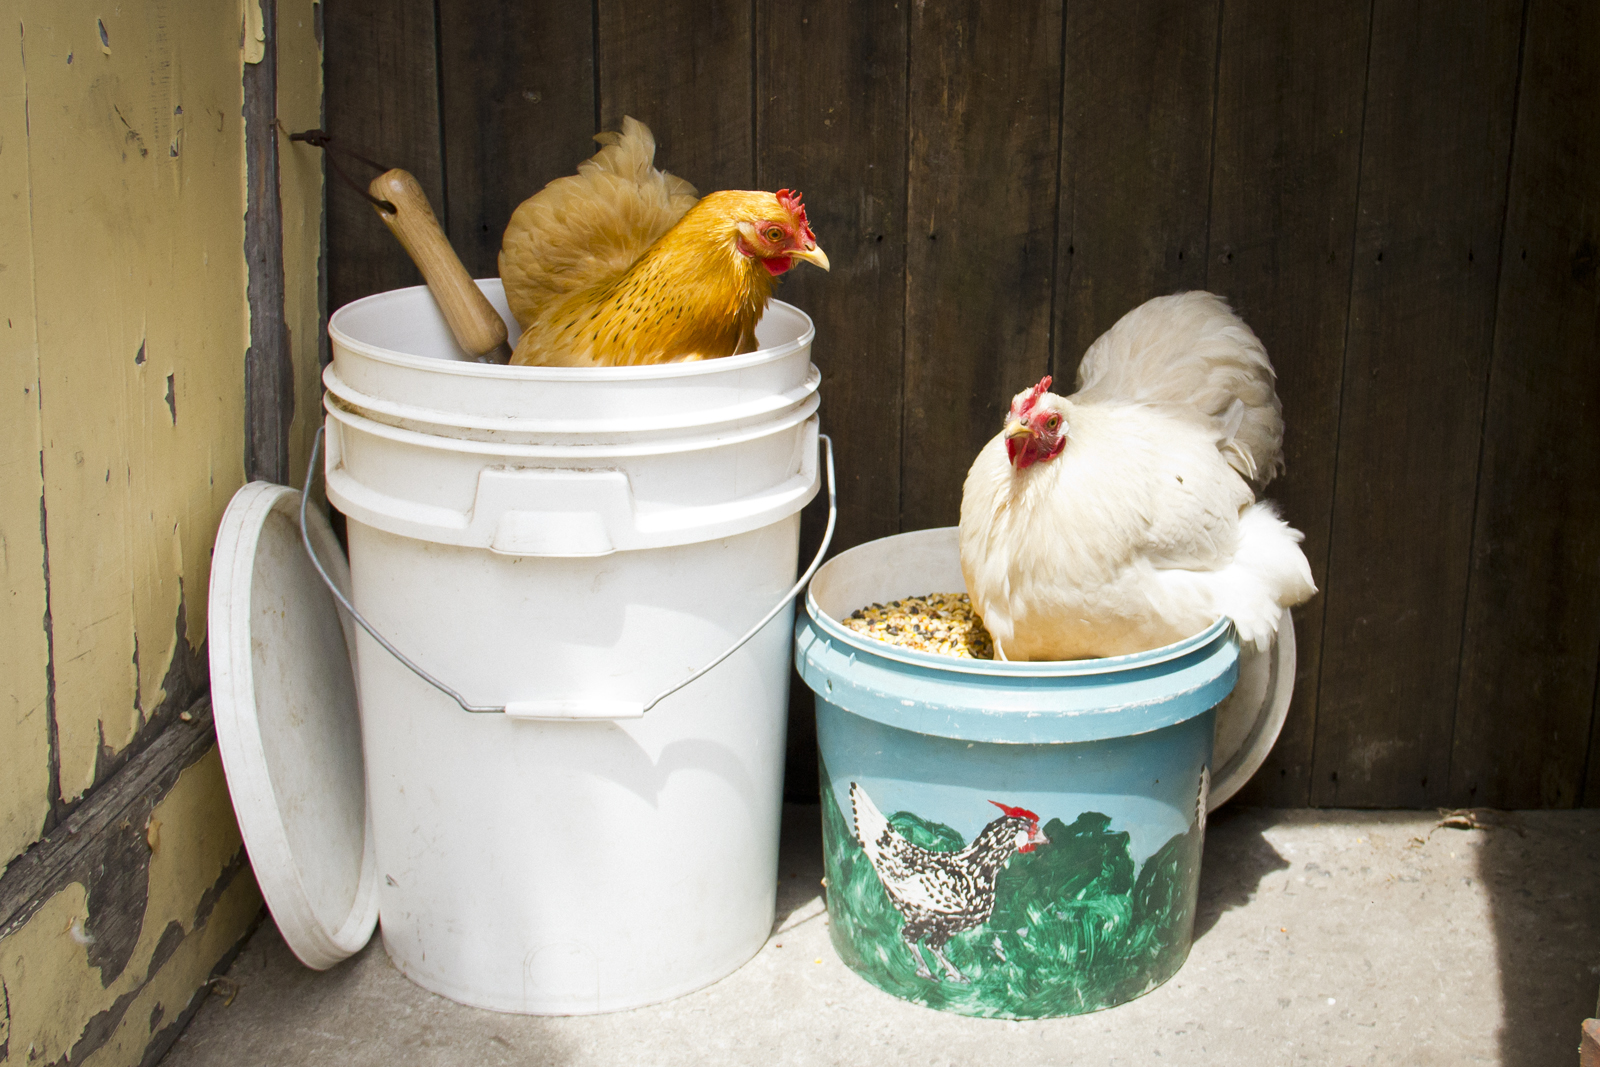 Keep pests out of your feed bins!